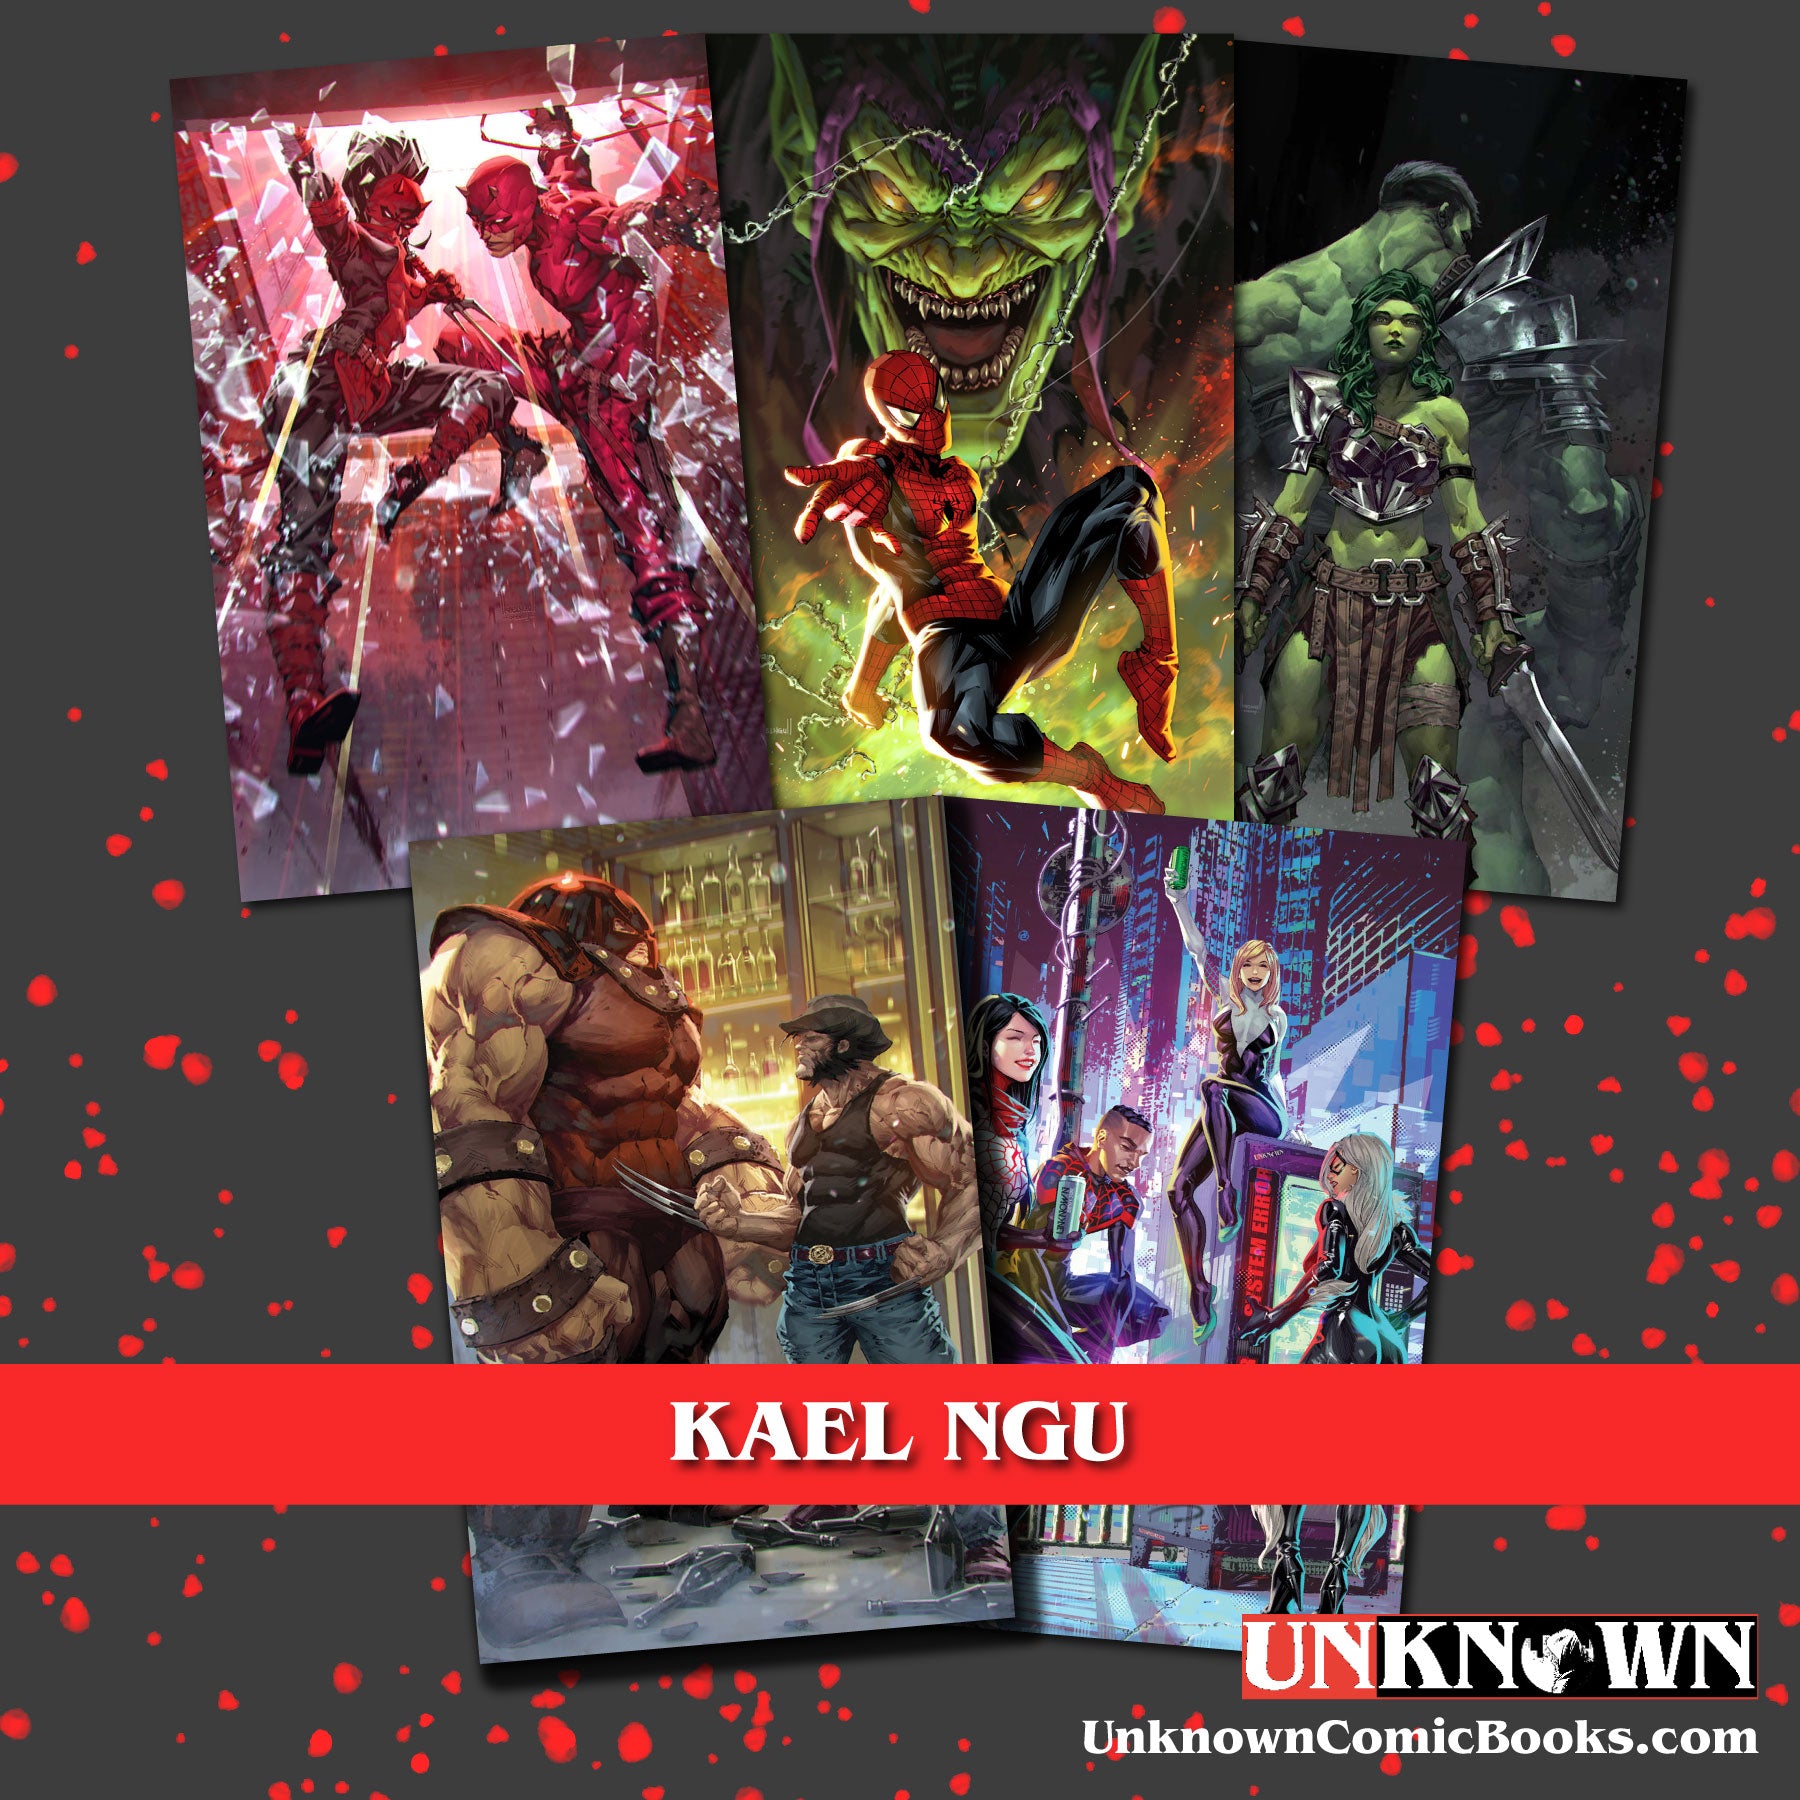 [5 PACK] UNKNOWN COMICS MYSTERY THEMED 👉🎨KAEL NGU ARTIST EXCLUSIVE BOX 👉VIRGIN (12/21/2022)